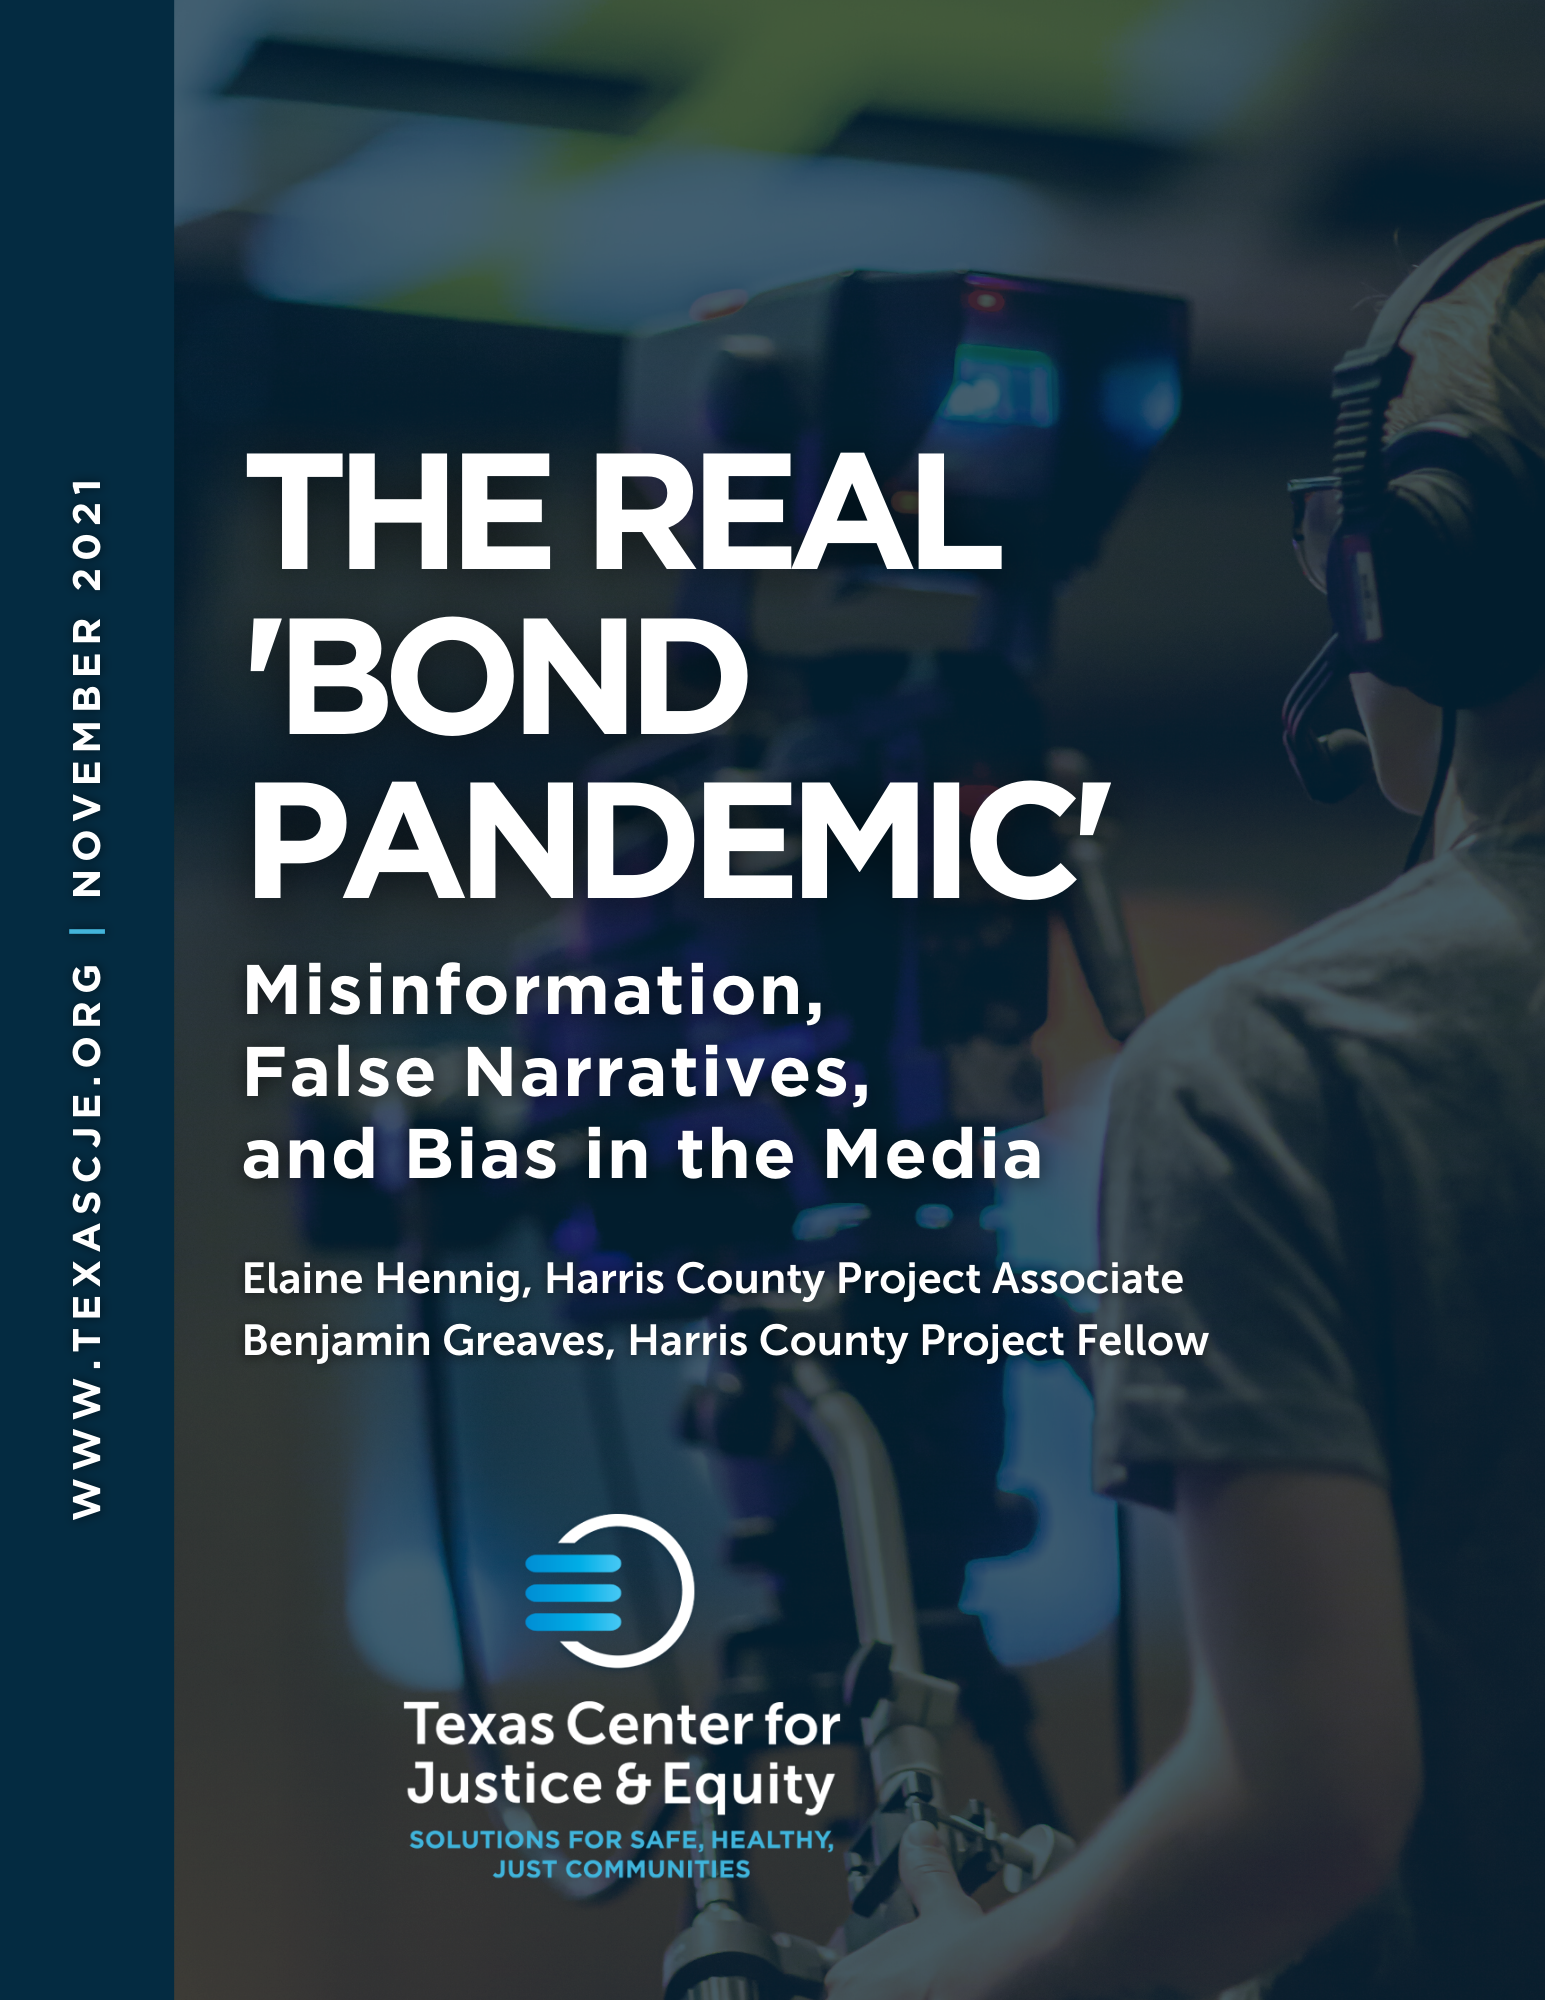 The cover of our new report, "The Real 'Bond Pandemic'"